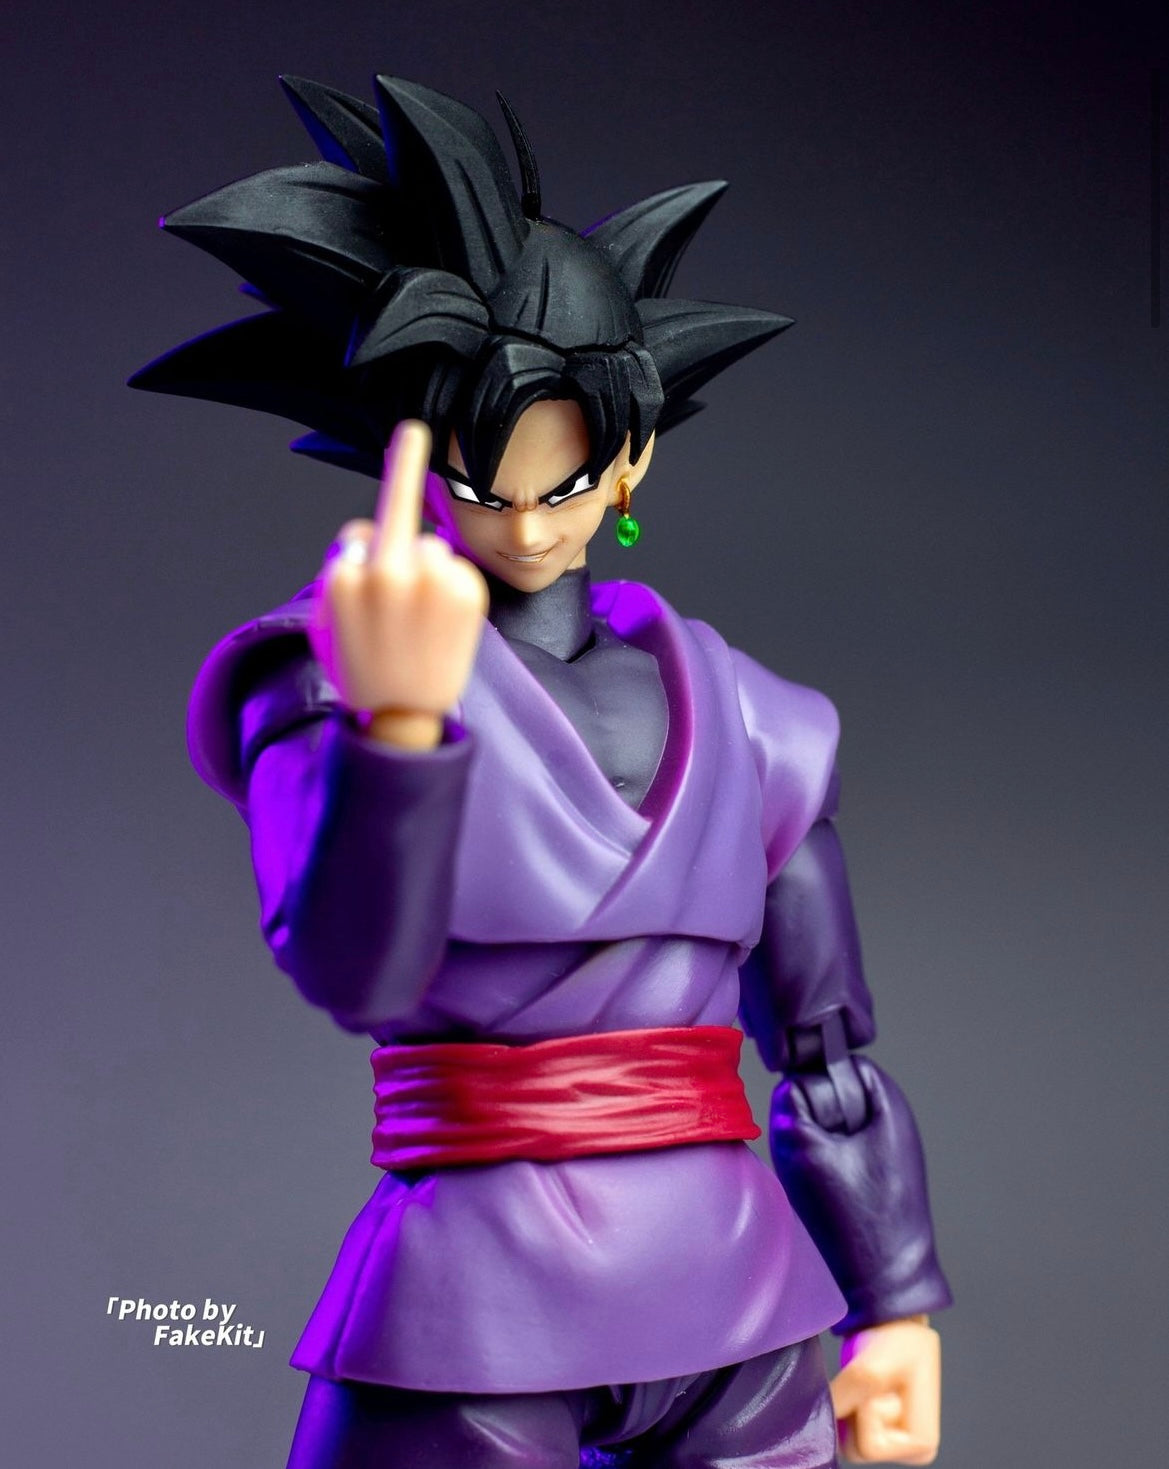 CUSTOM Dragon Ball SHF s.h.figuarts Broly Action Figure in stock